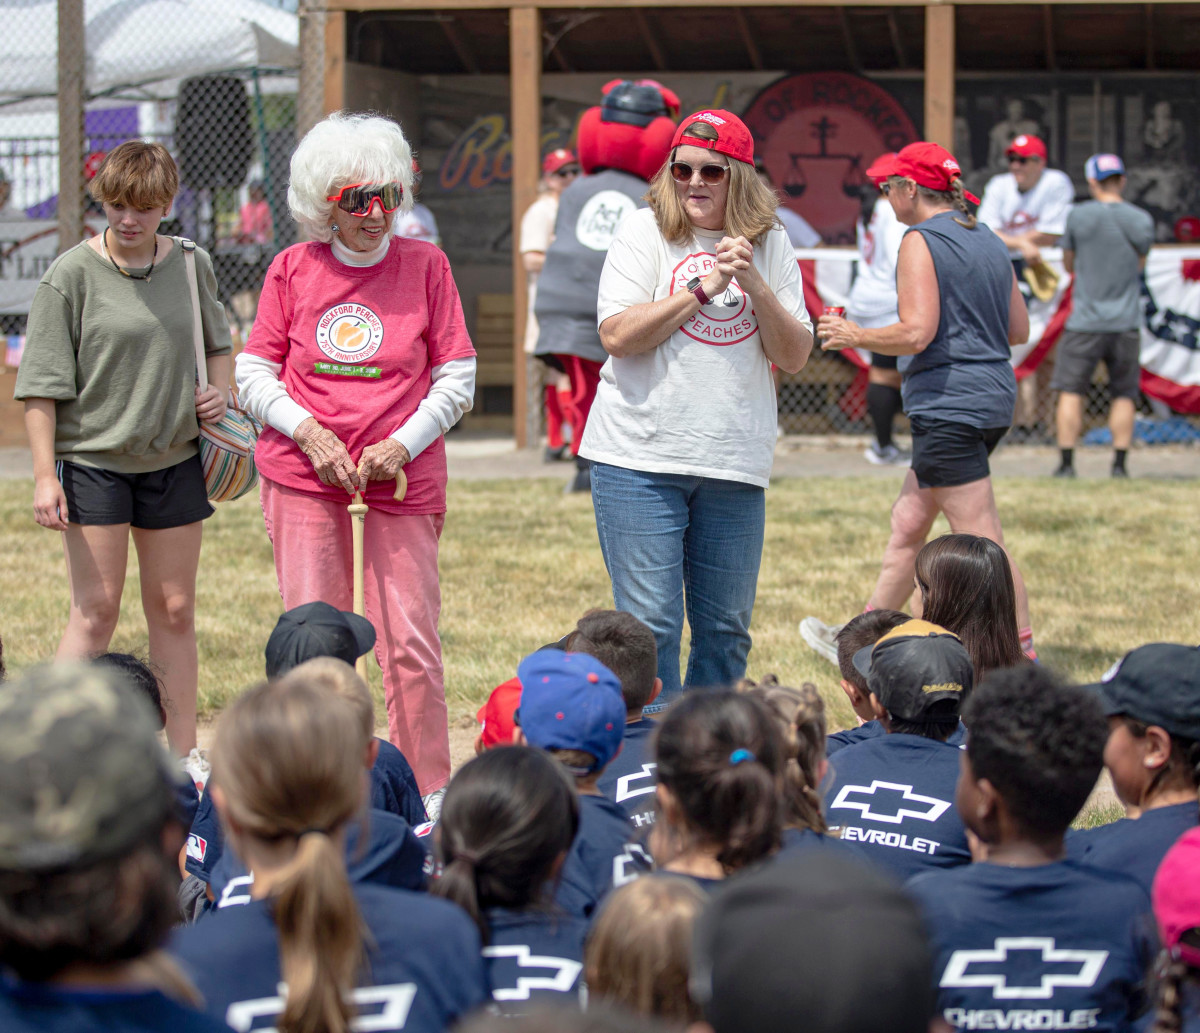 Maybelle Blair, a former member of the All-American Girls Professional Baseball League, and Megan Cavanagh, who played a member of the Rockford Peaches in the 1992 movie “A League of Their Own,” speak to kids on Saturday, July 2, 2022, at Beyer Stadium in Rockford.